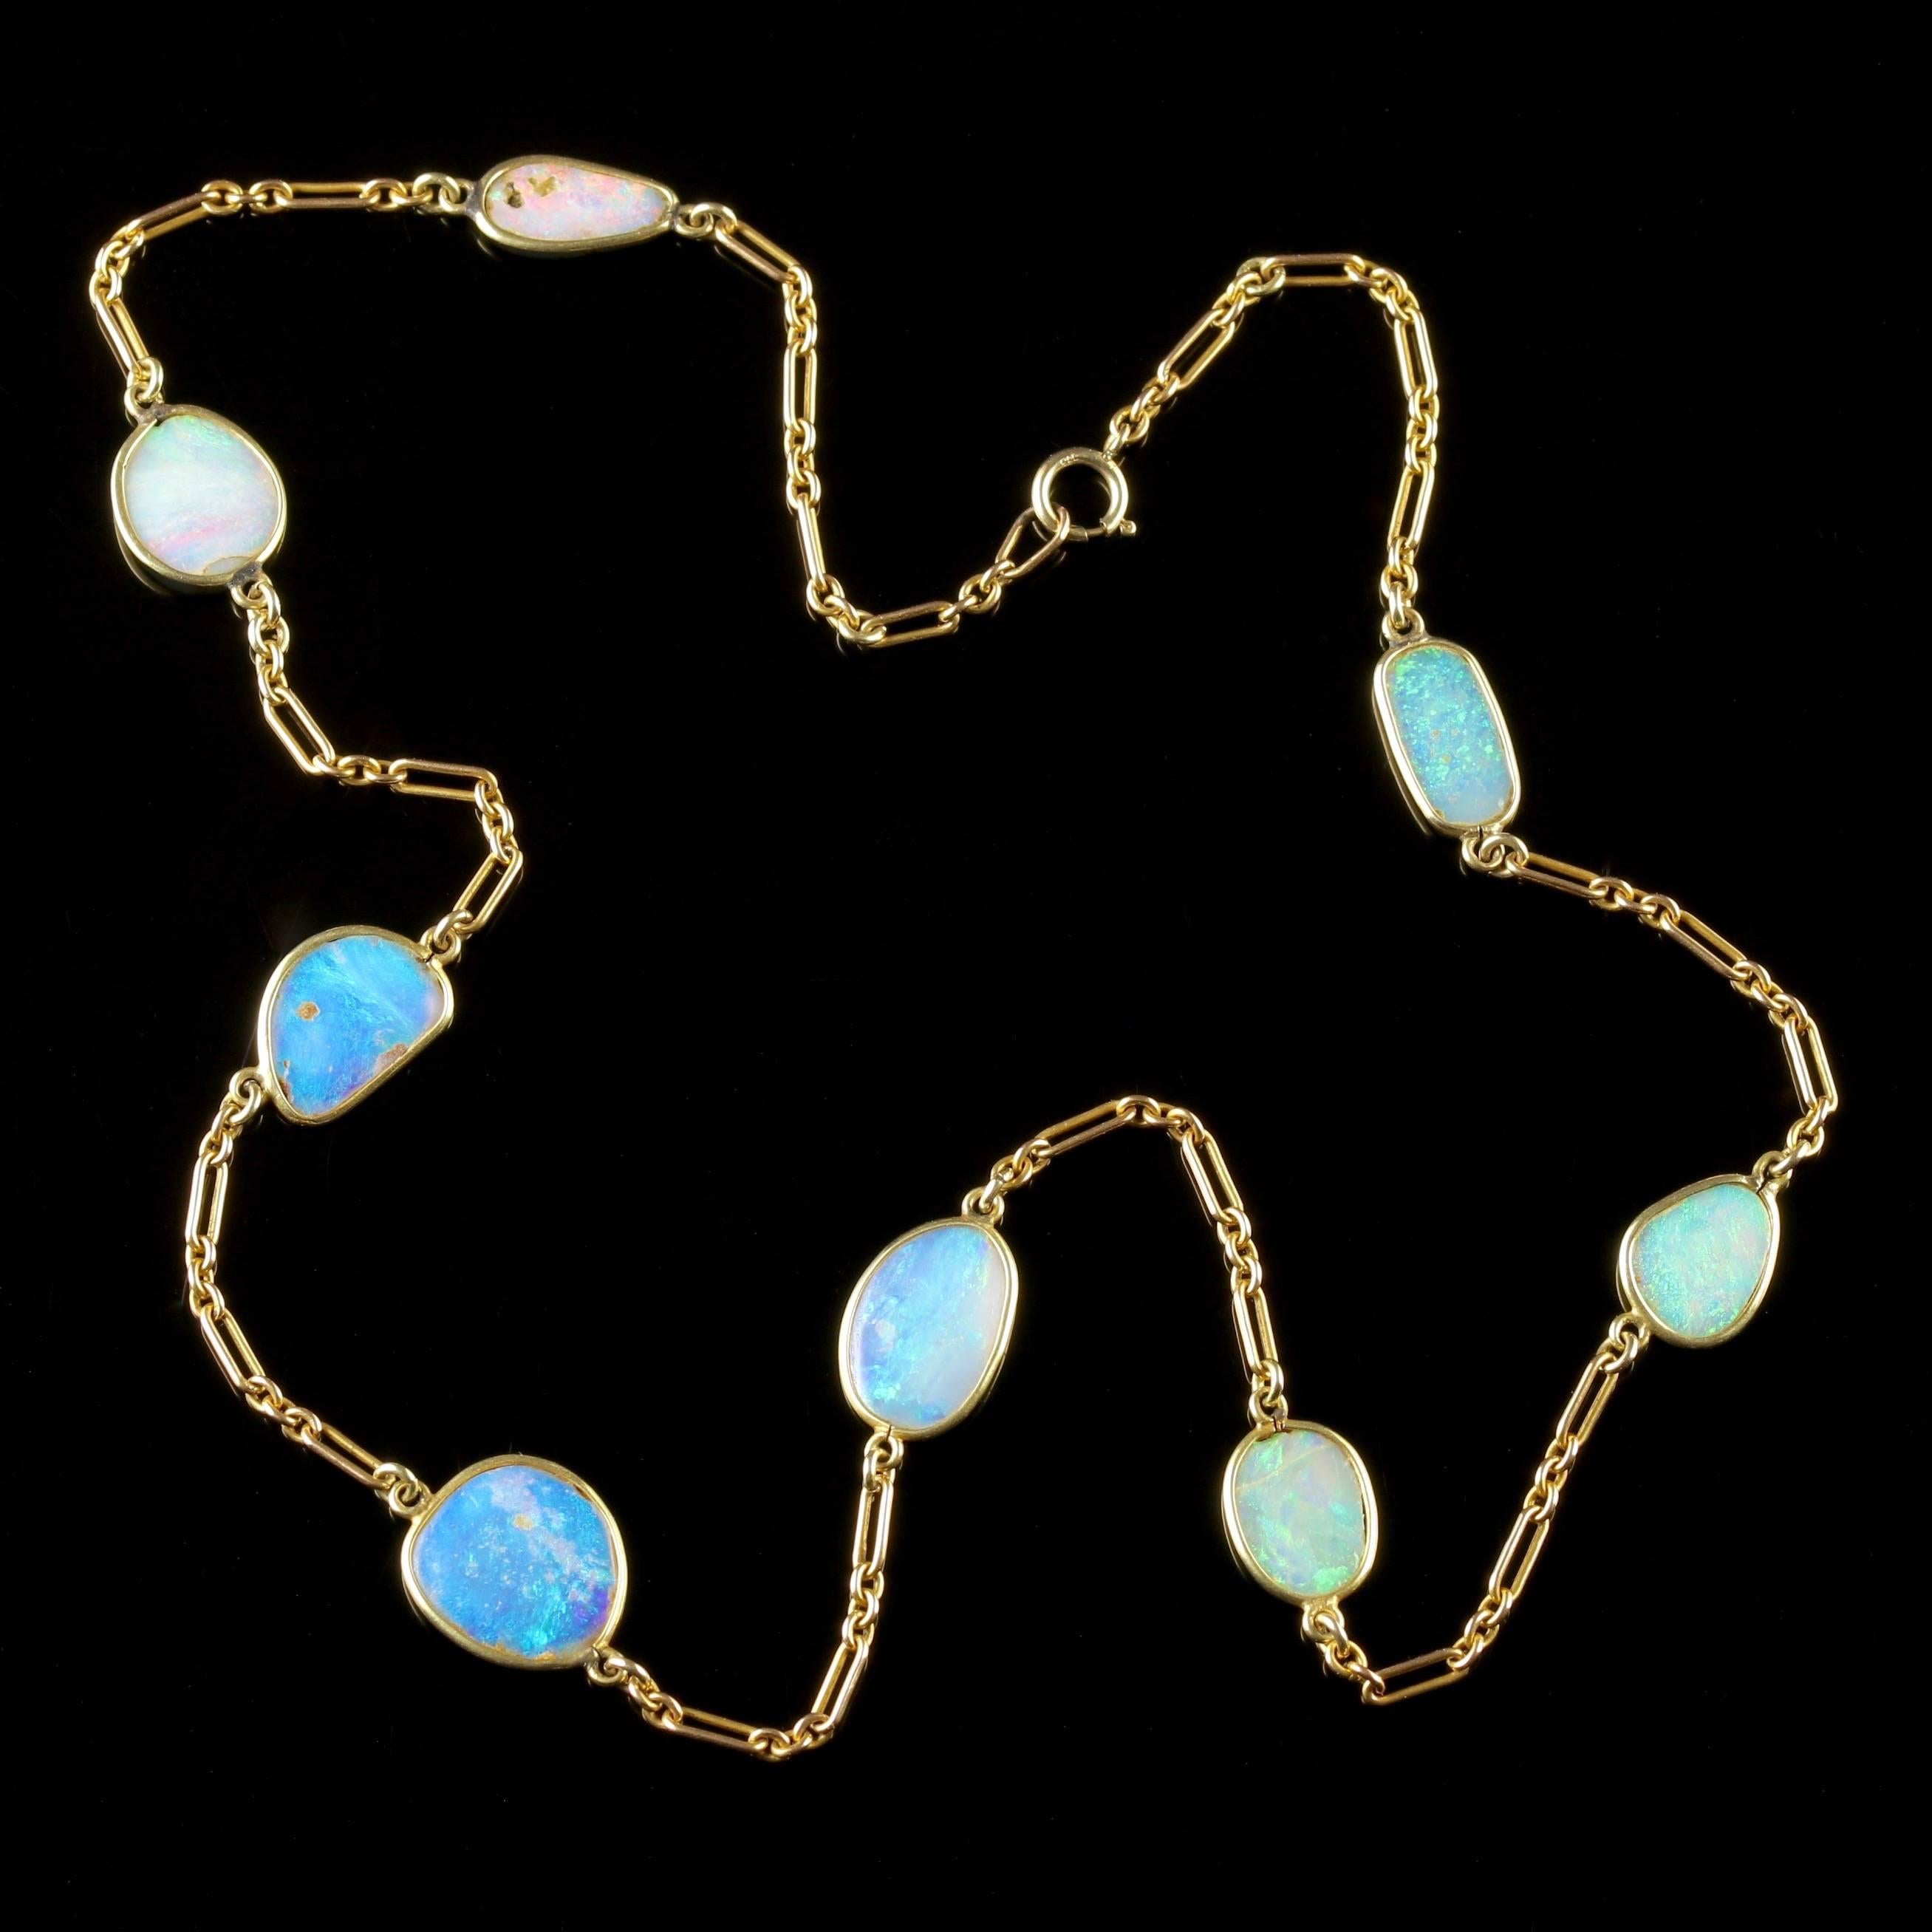 To read more please click continue reading below-

This fabulous antique 9ct Gold Opal necklace is genuine Victorian Circa 1900.

The wonderful necklace is adorned with stunning flat Opal links which have a hint of transparency to them. 

The lovely